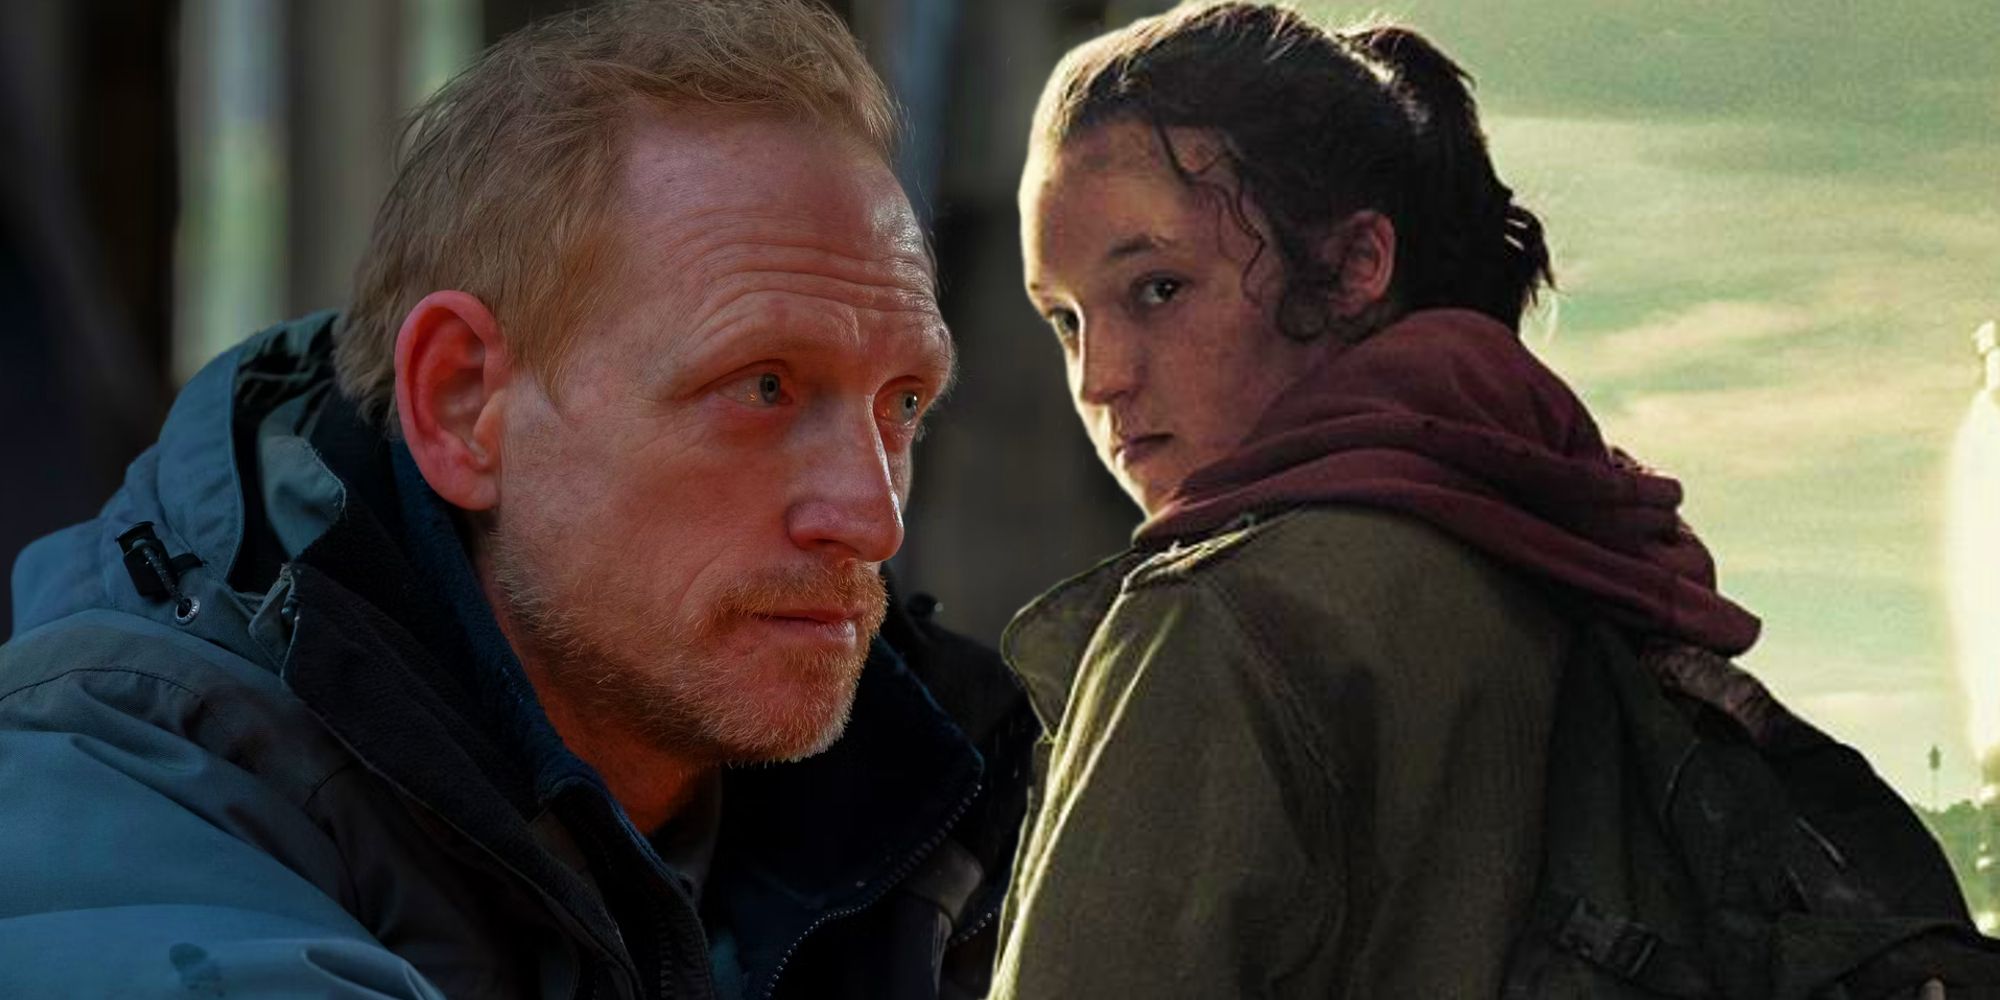 Scott Shepherd as David in Last of Us episode 8 and Bella Ramsey as Ellie in her character poster for HBO's Last of Us